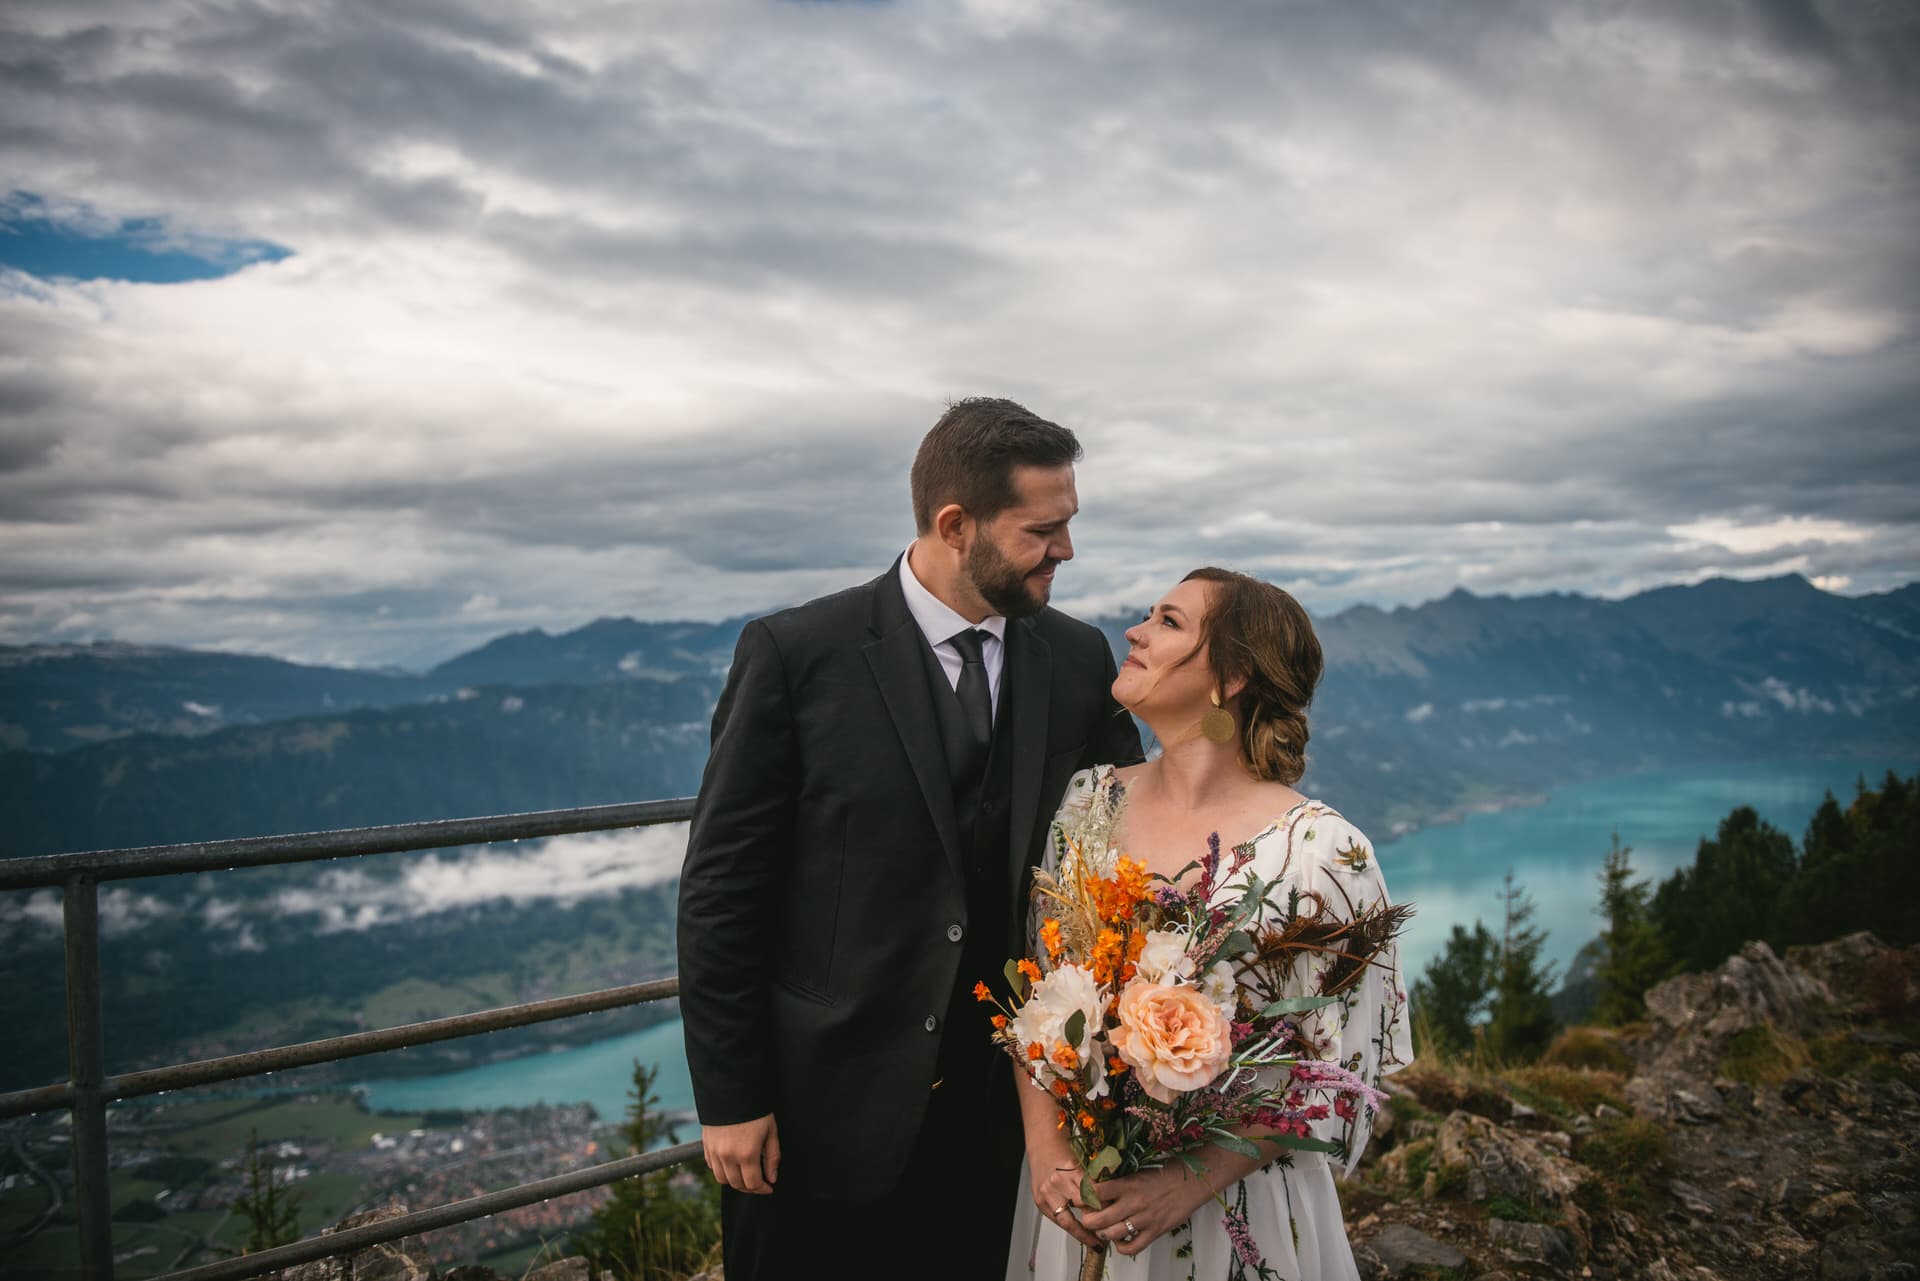 Couple looking at each other after their ceremony in Switzerland